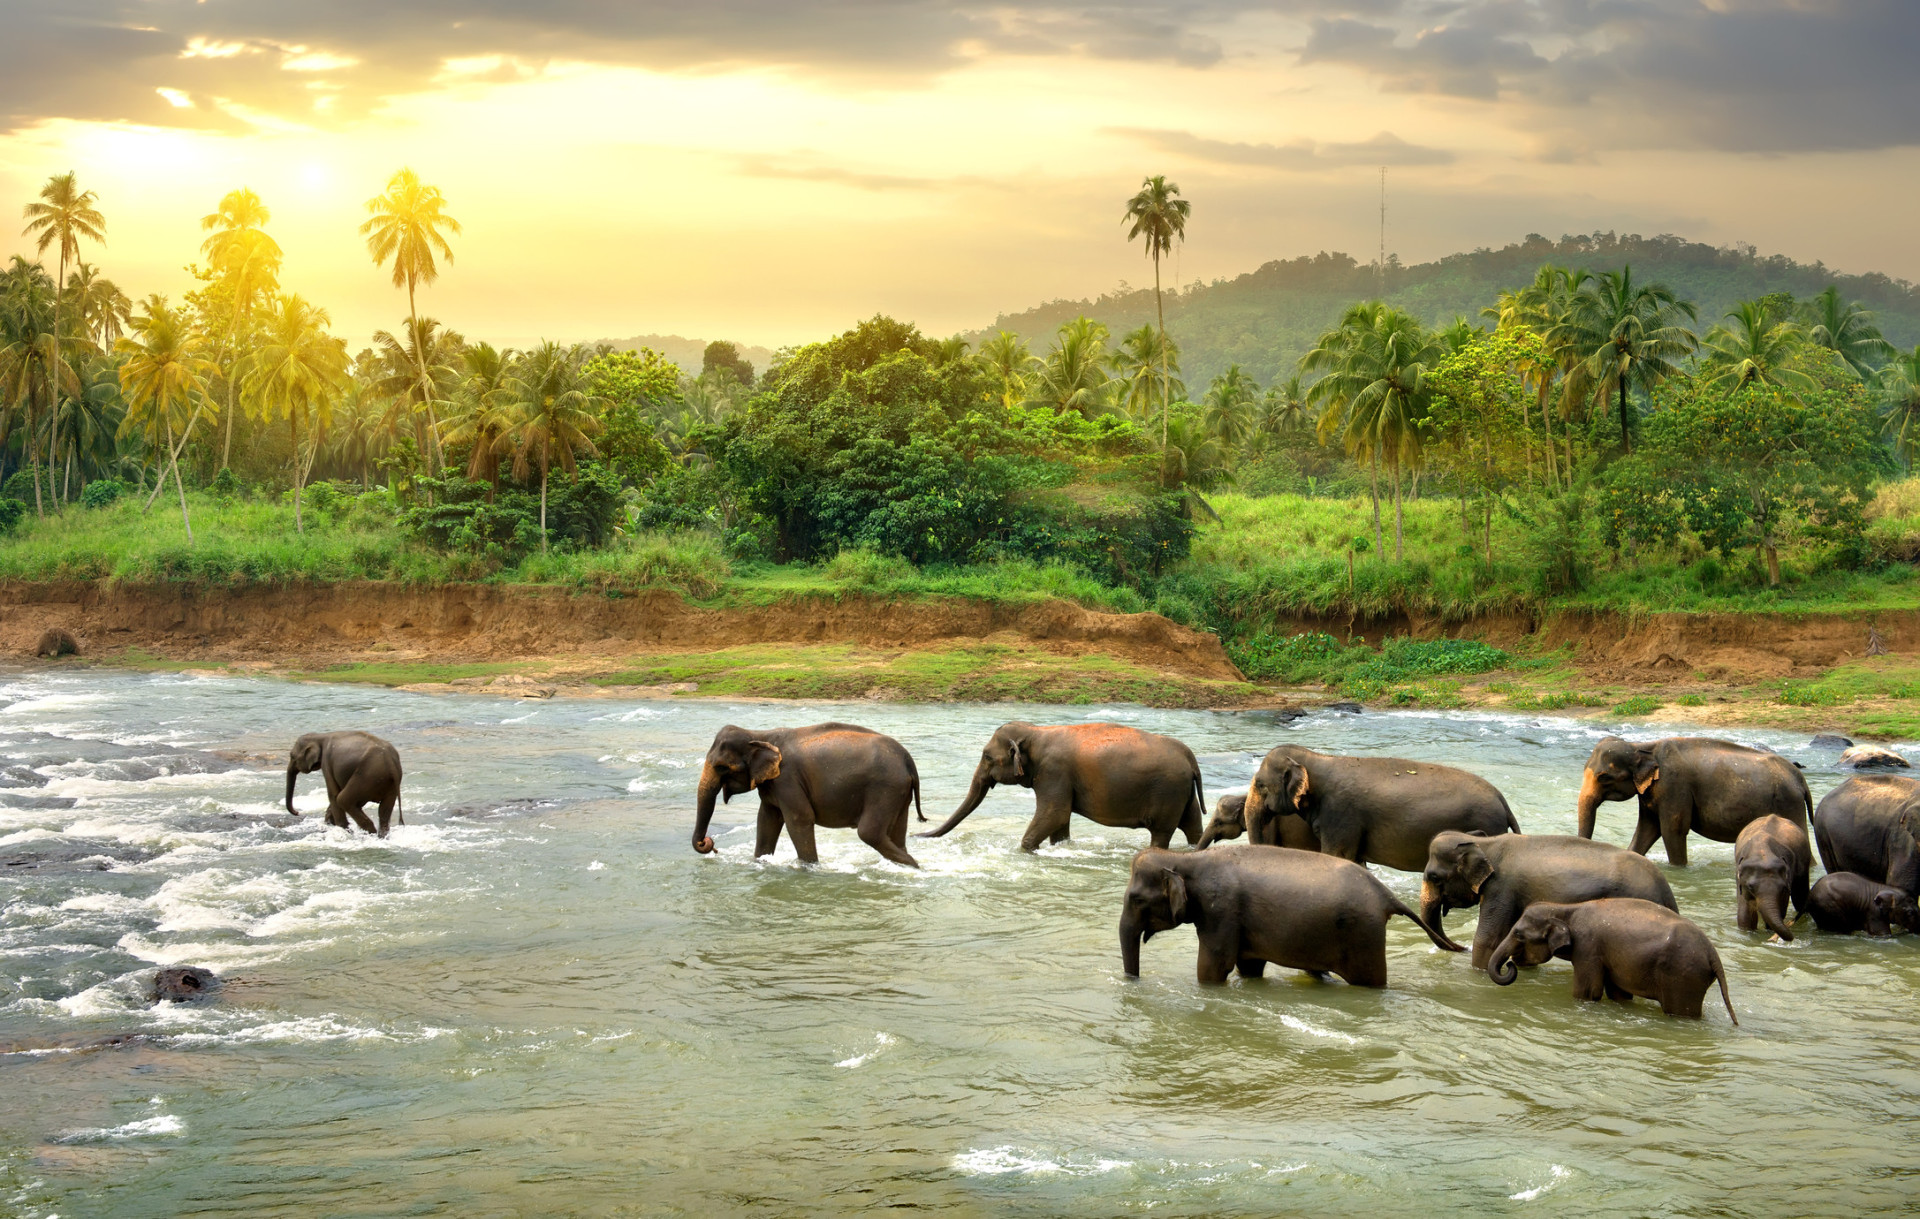 Sri Lanka is a wonderful option for people who want to combine culture, wildlife and nature, and paradisiac beaches in one single trip.<p>You may also like:<a href="https://www.starsinsider.com/n/451191?utm_source=msn.com&utm_medium=display&utm_campaign=referral_description&utm_content=284295v5en-in"> The most covered songs ever</a></p>